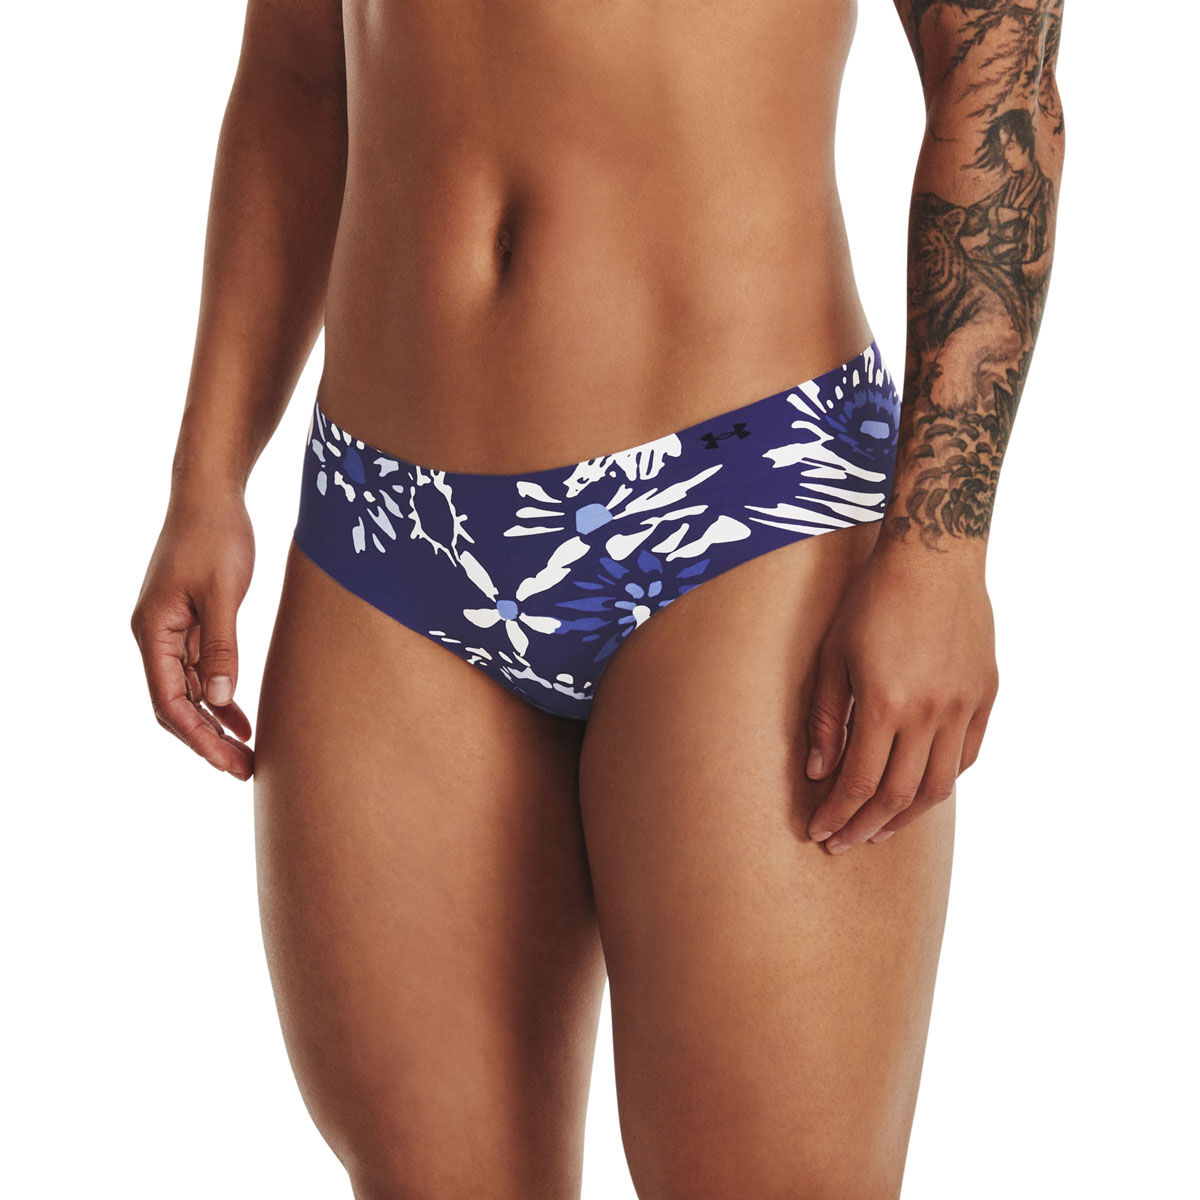 Womens panties Under Armour PS HIPSTER 3PACK W brown